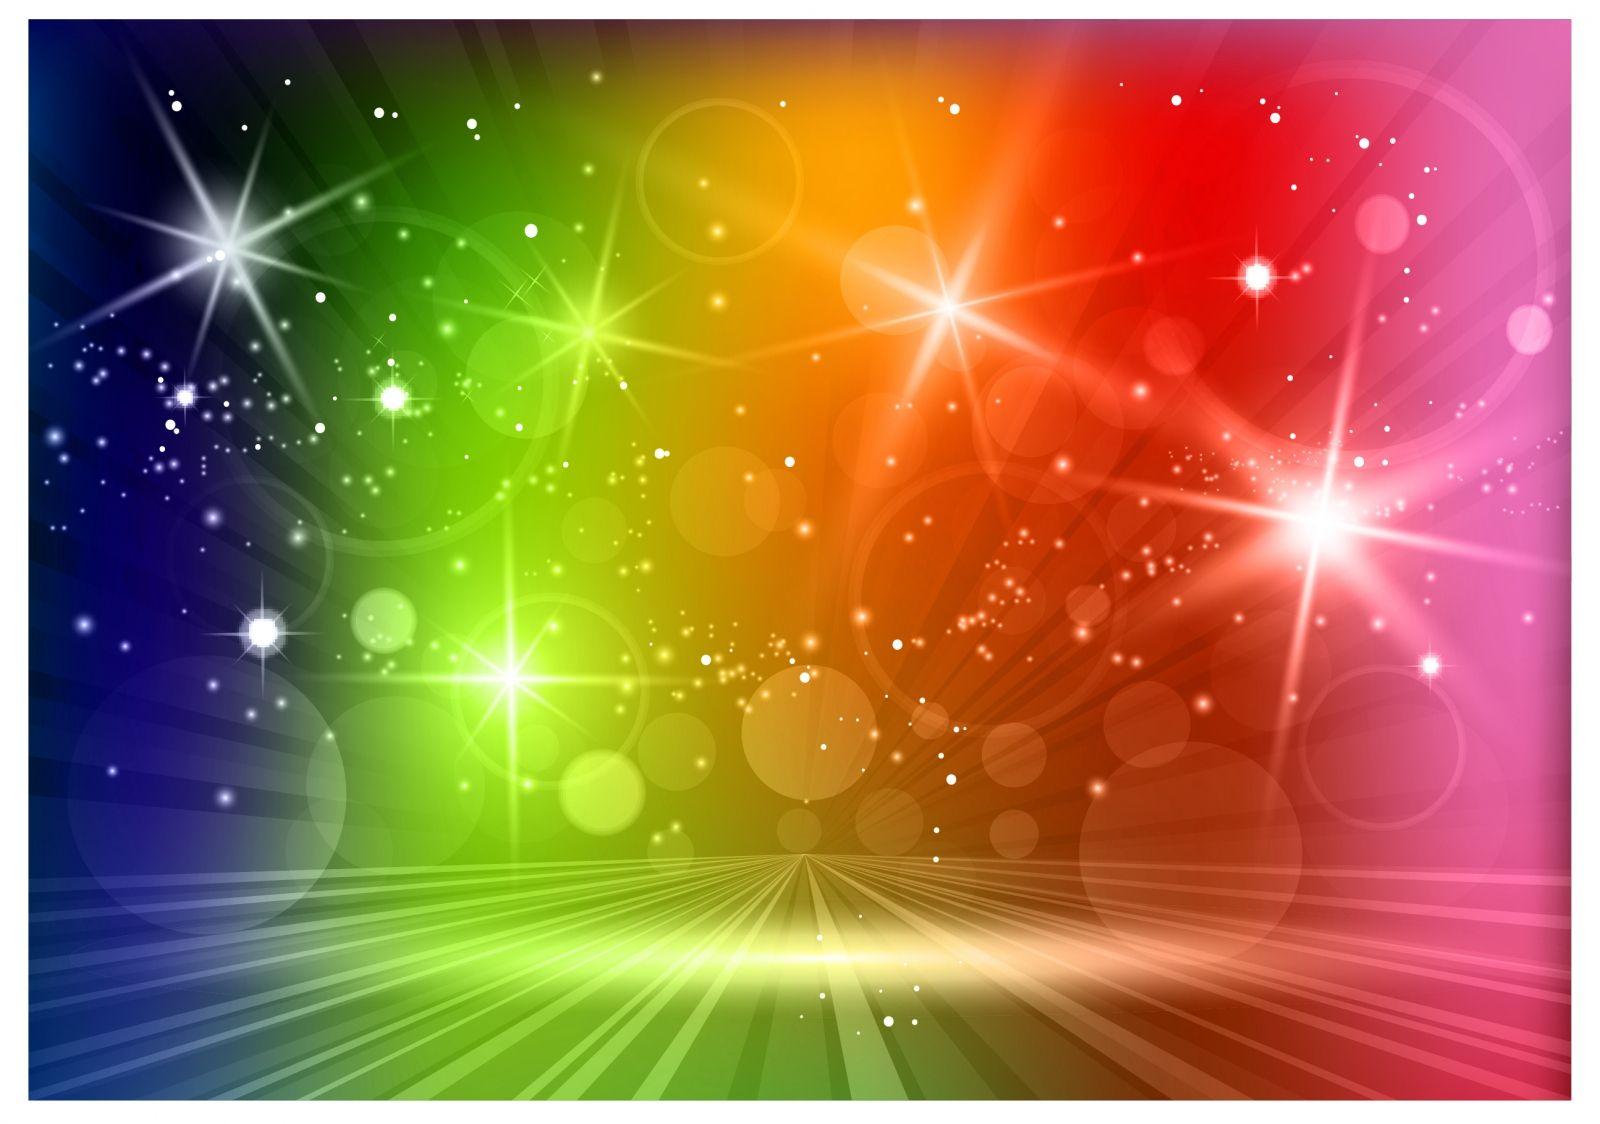 Multicolored light effects background Free Vector / 4Vector